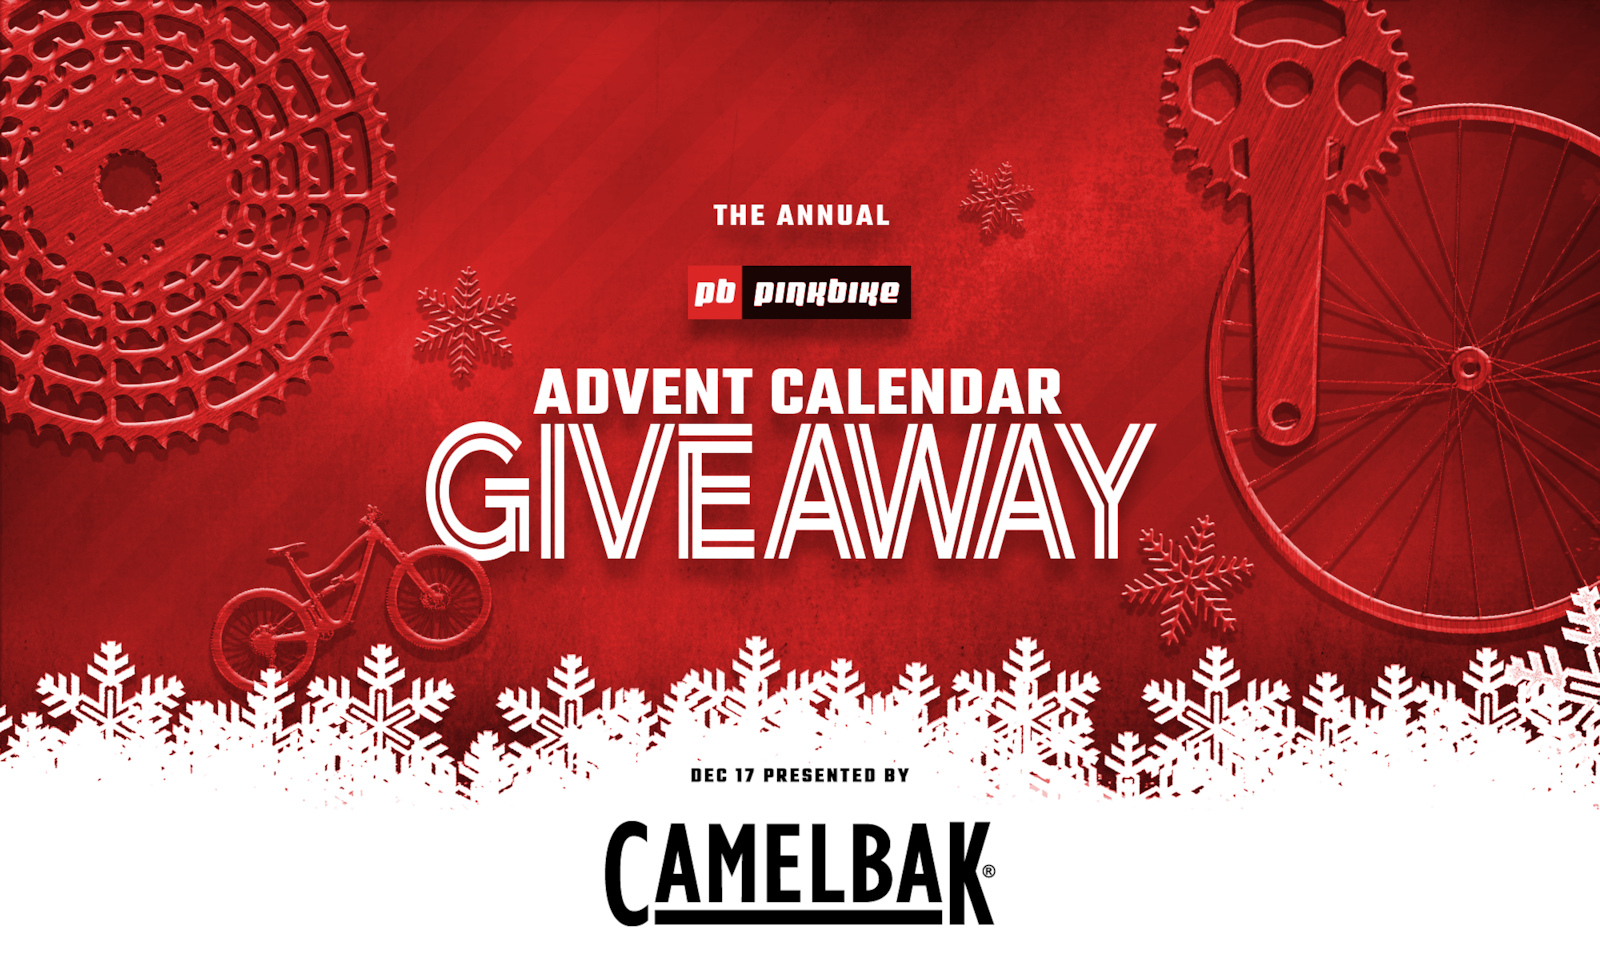 Enter To Win a CamelBak Prize Pack Pinkbike's Advent Calendar